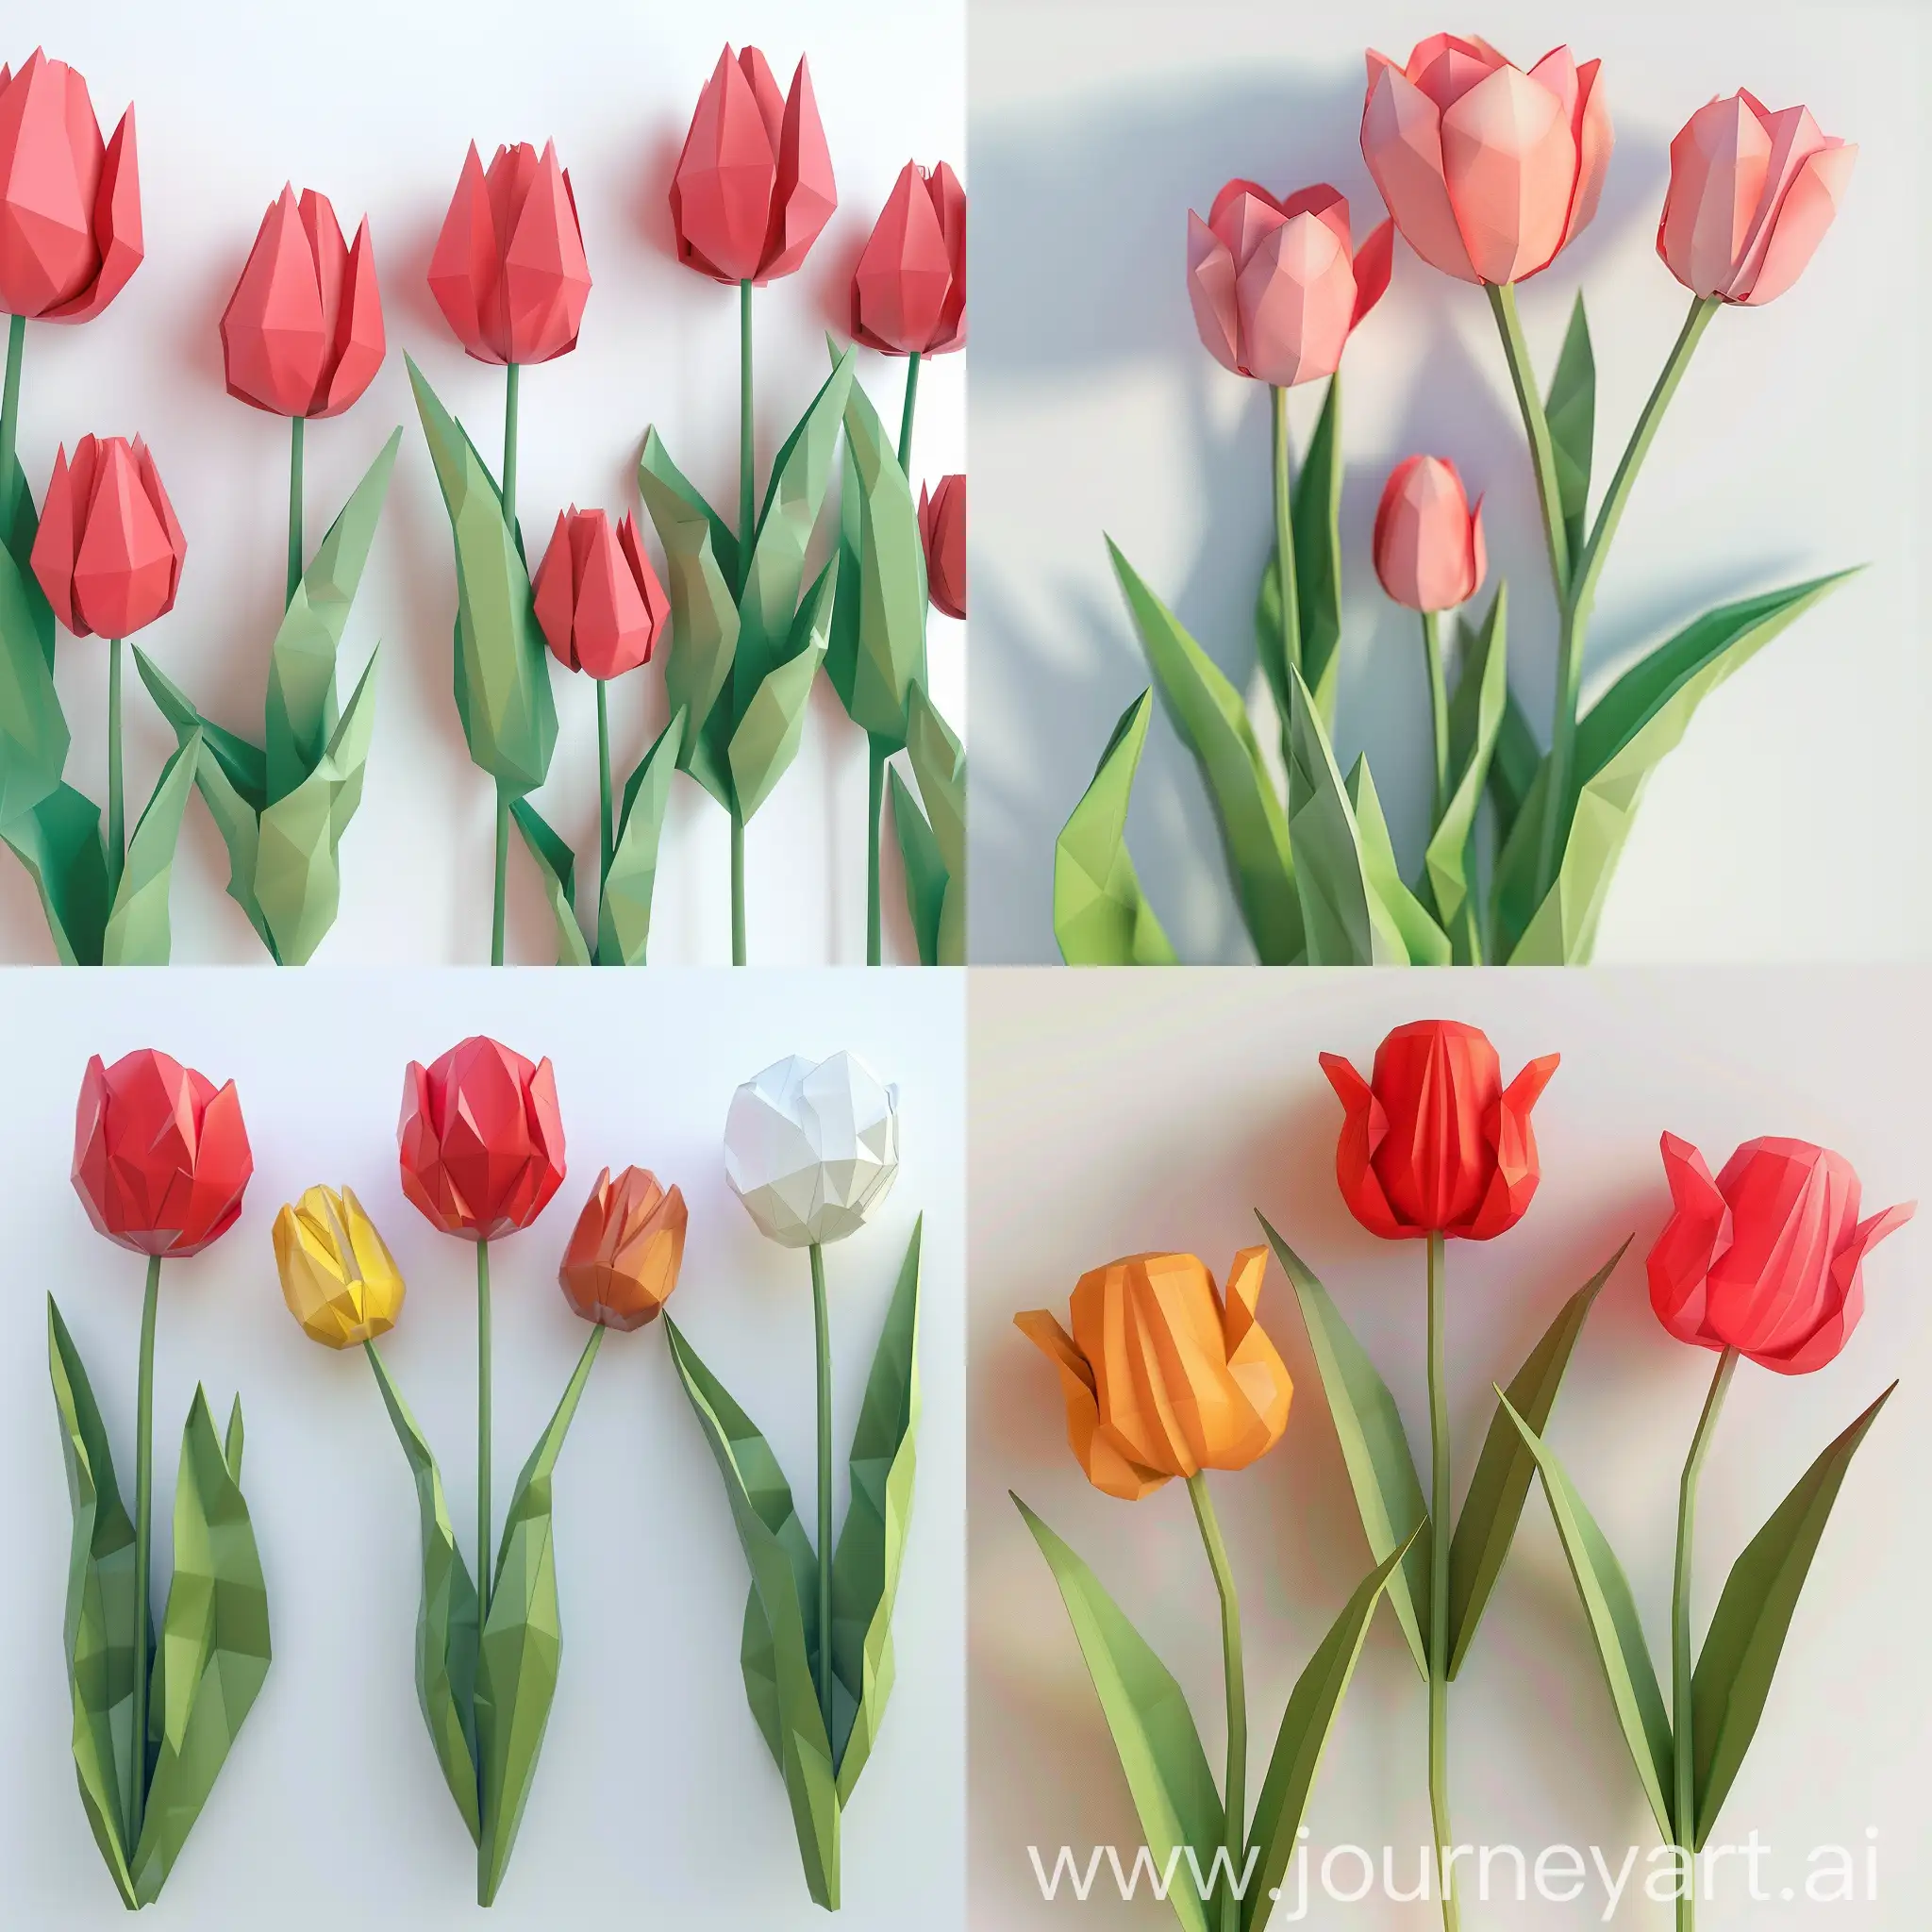 3D-Tulips-on-White-Background-Soft-Texture-Low-Poly-Floral-Art